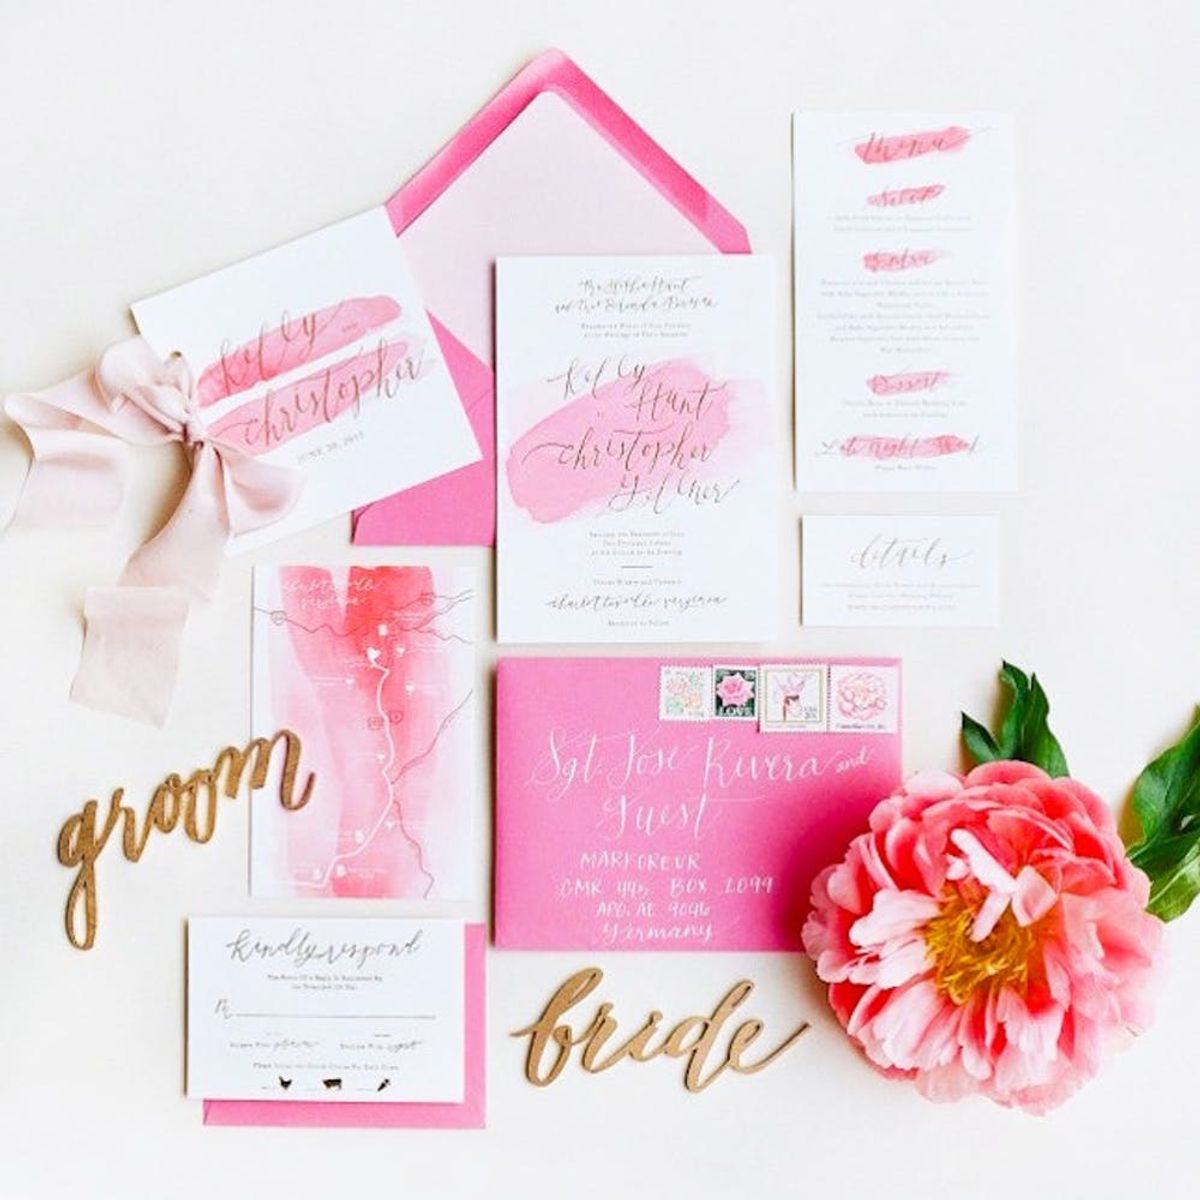 15 Gold Foil Wedding Invitations That Will Make You #Swoon